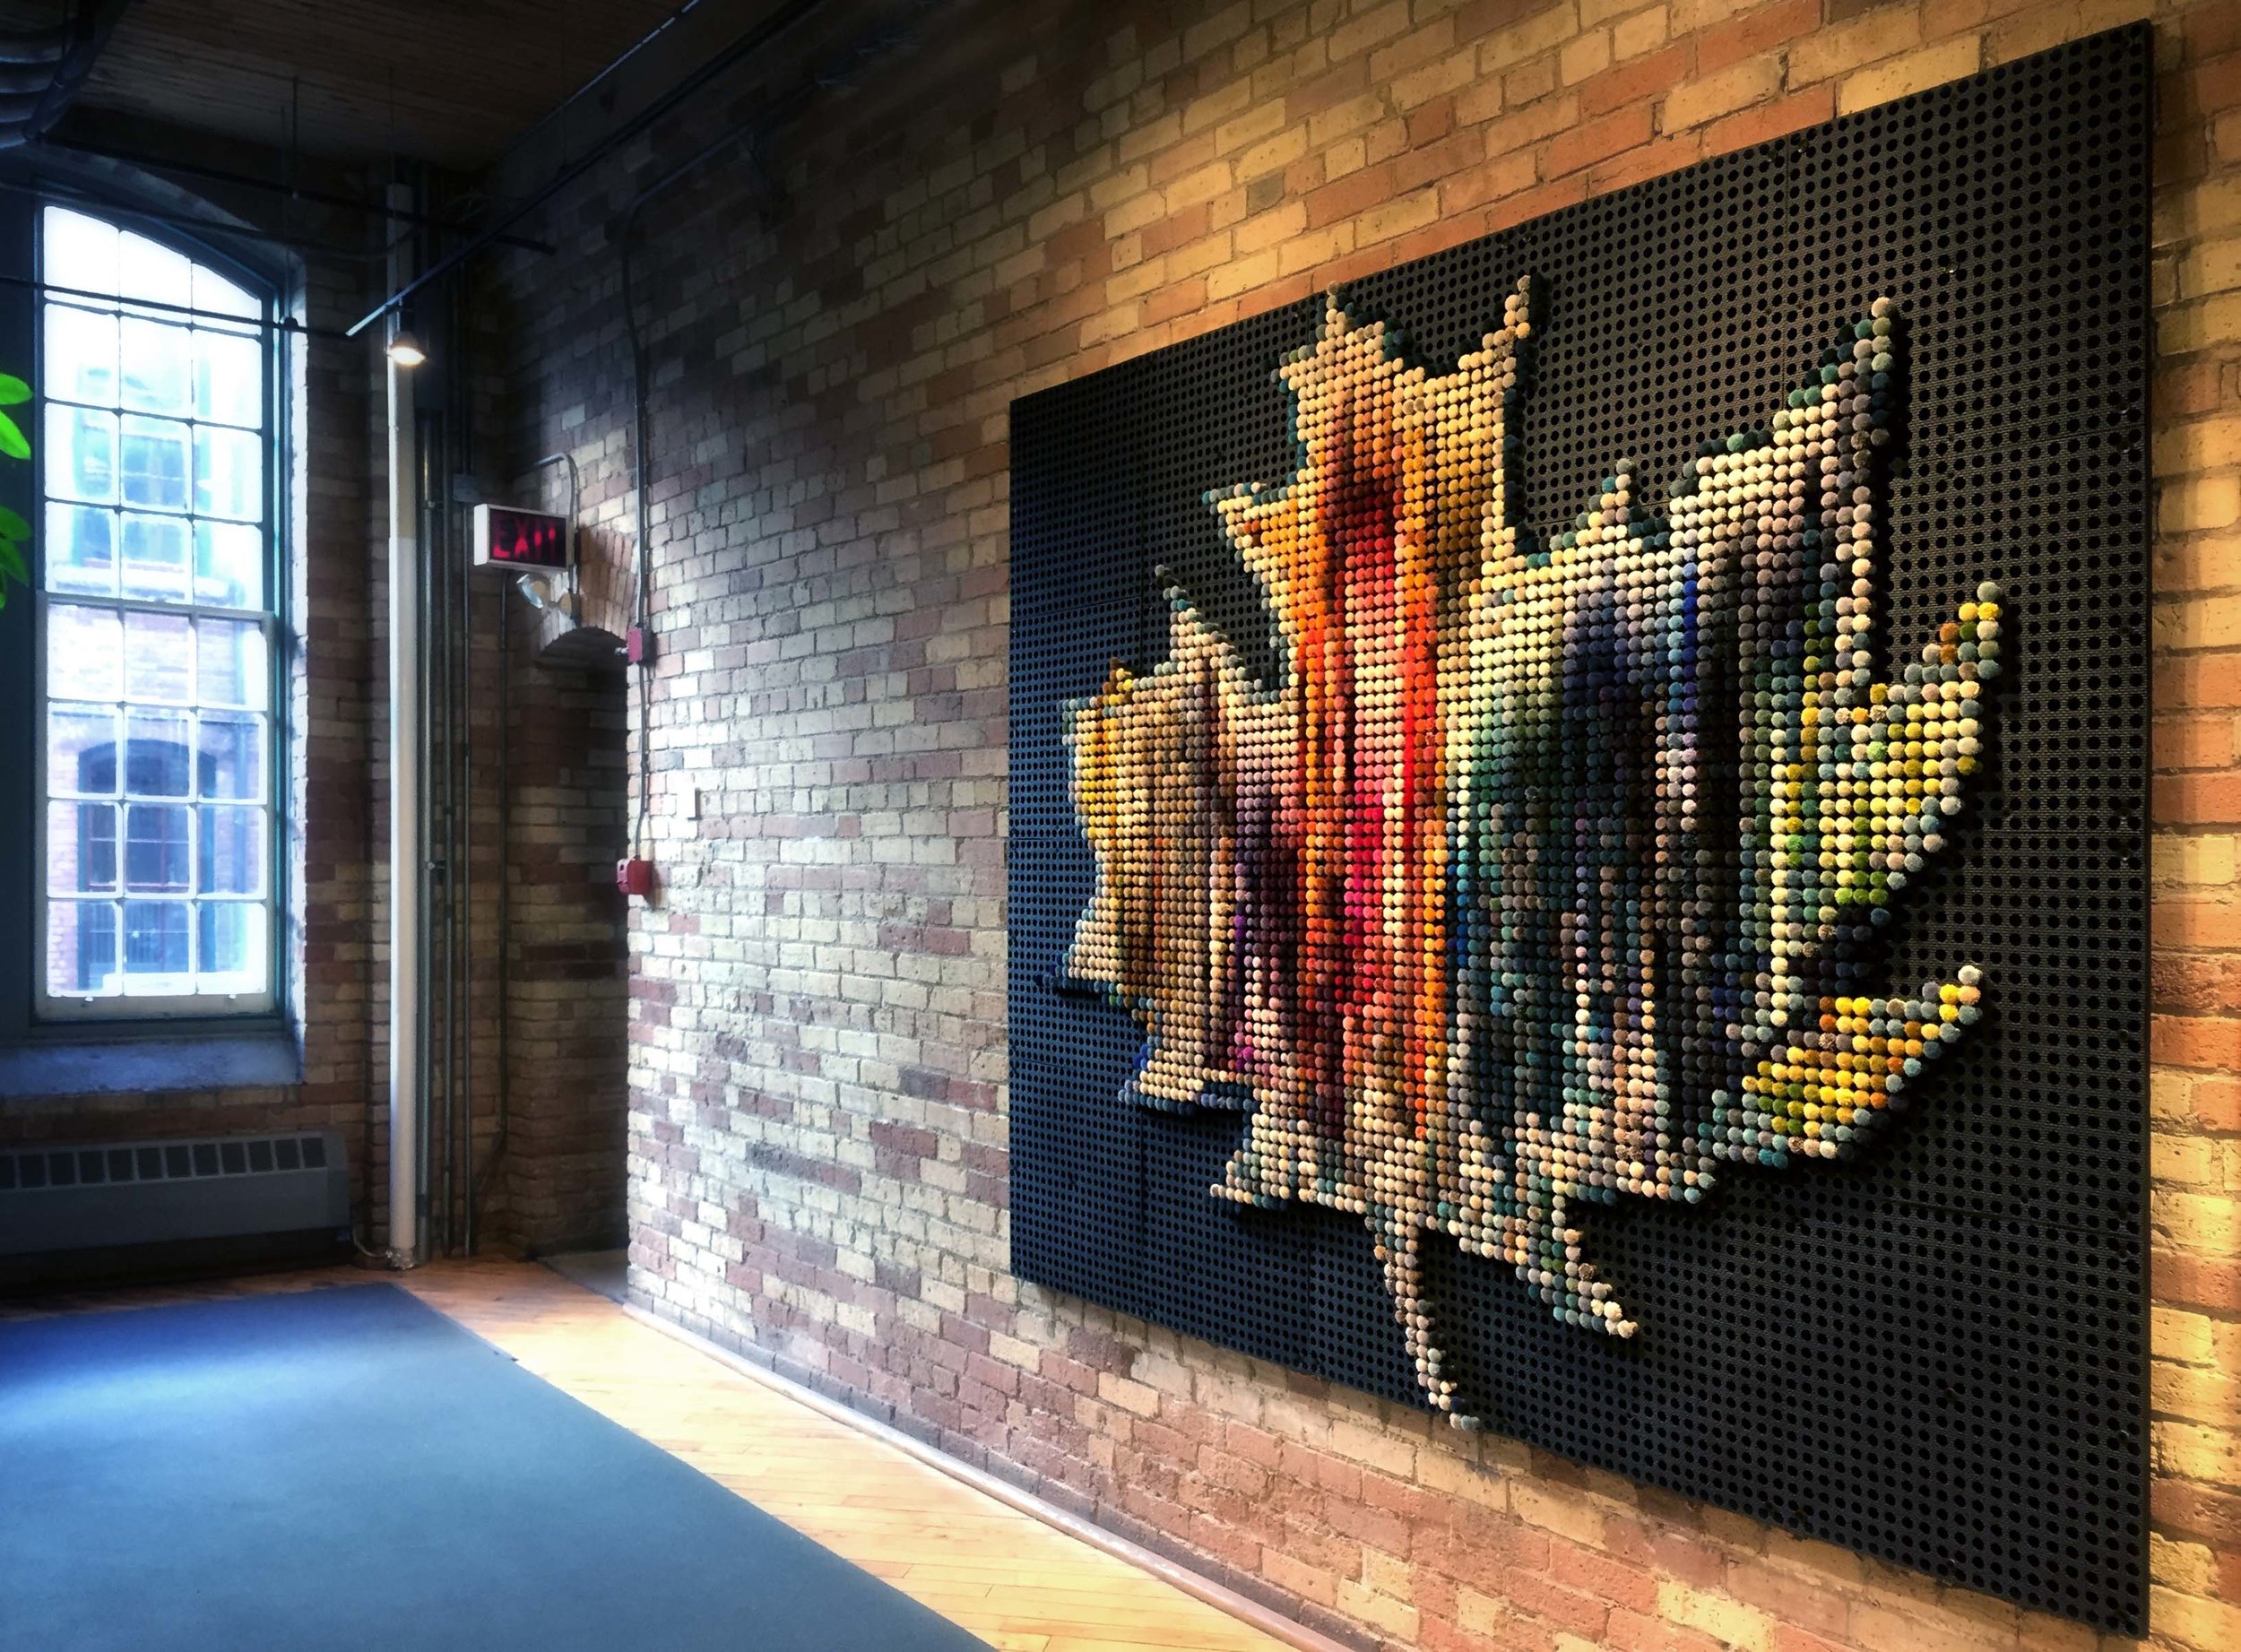  “Canada Leaf” Pom Mosaic™ featured in the front lobby of The Carpet Factory Lofts in Toronto • 2017 ( Learn more about Pom Mosaics™ ) 